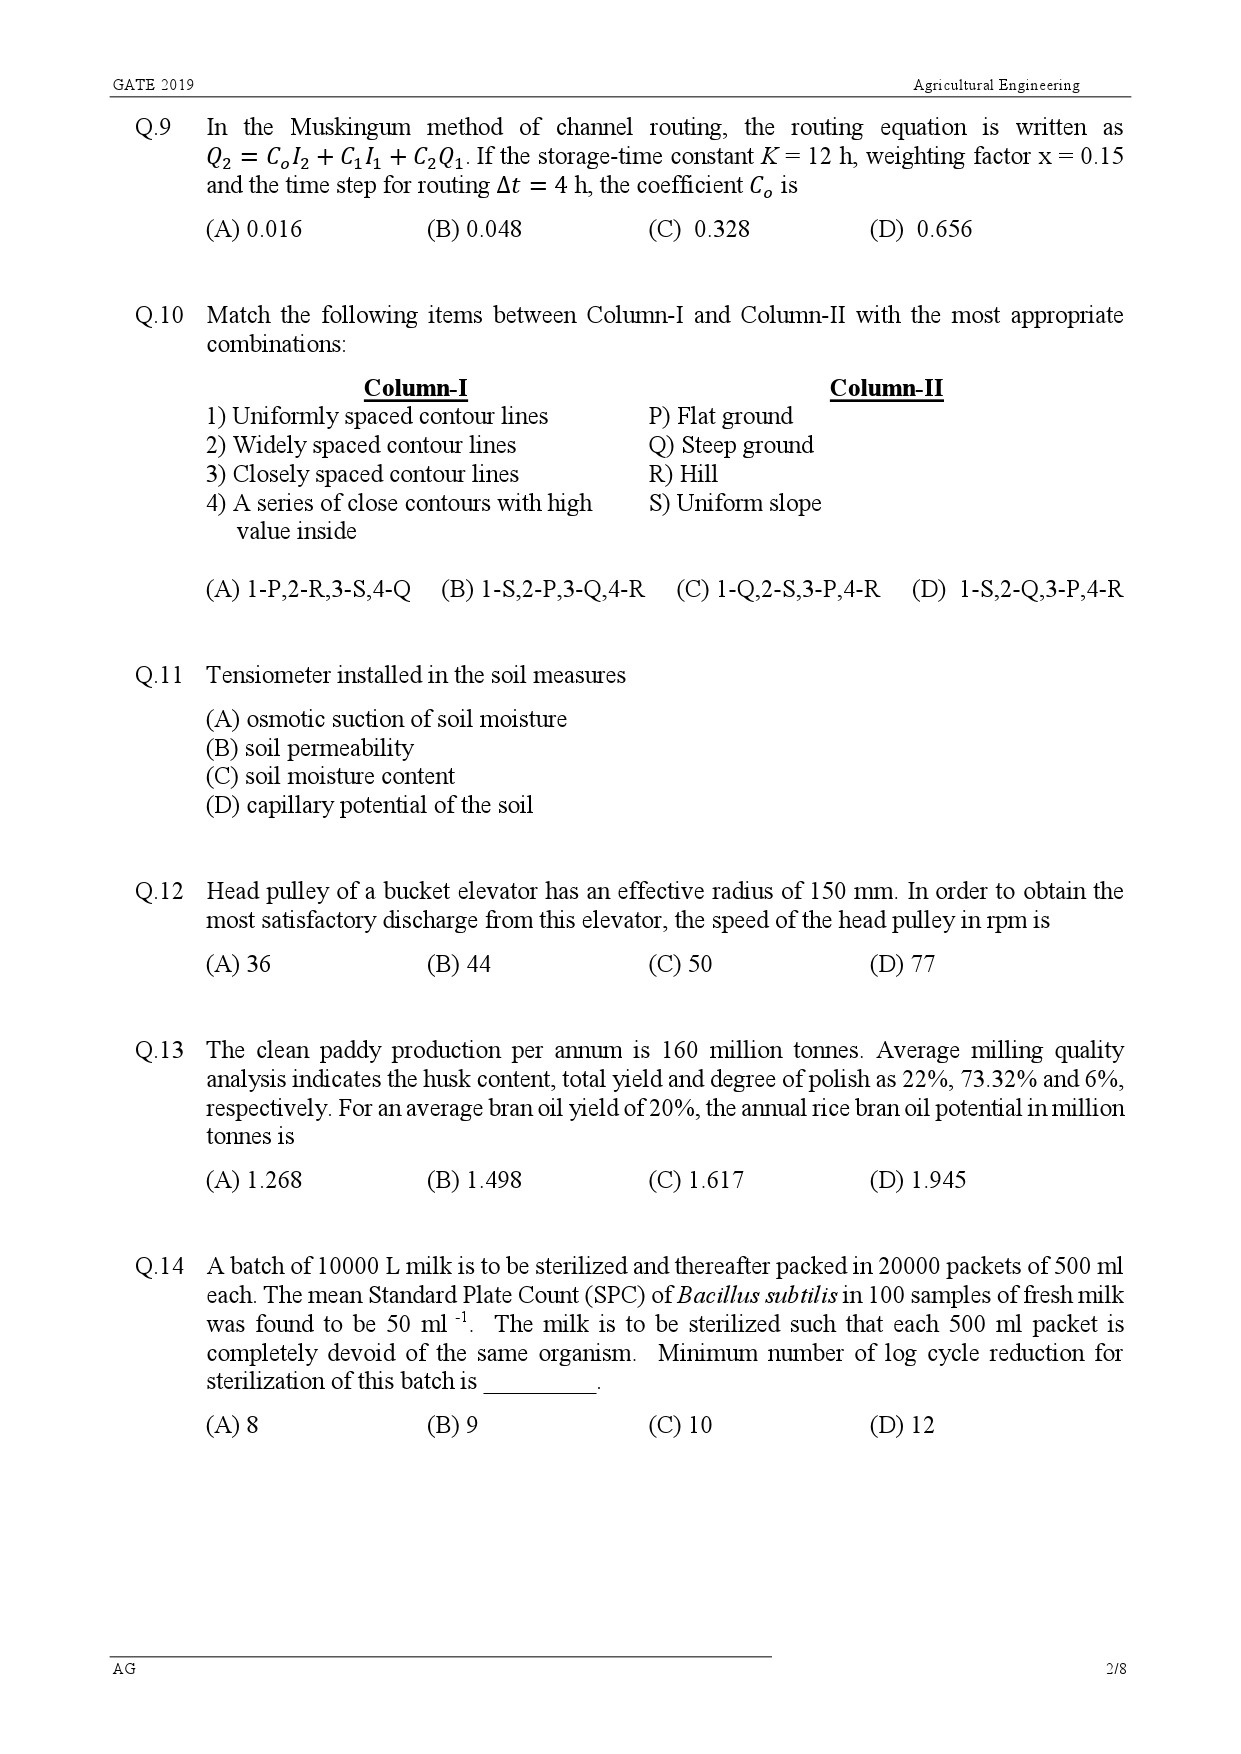 GATE Exam Question Paper 2019 Agricultural Engineering 2